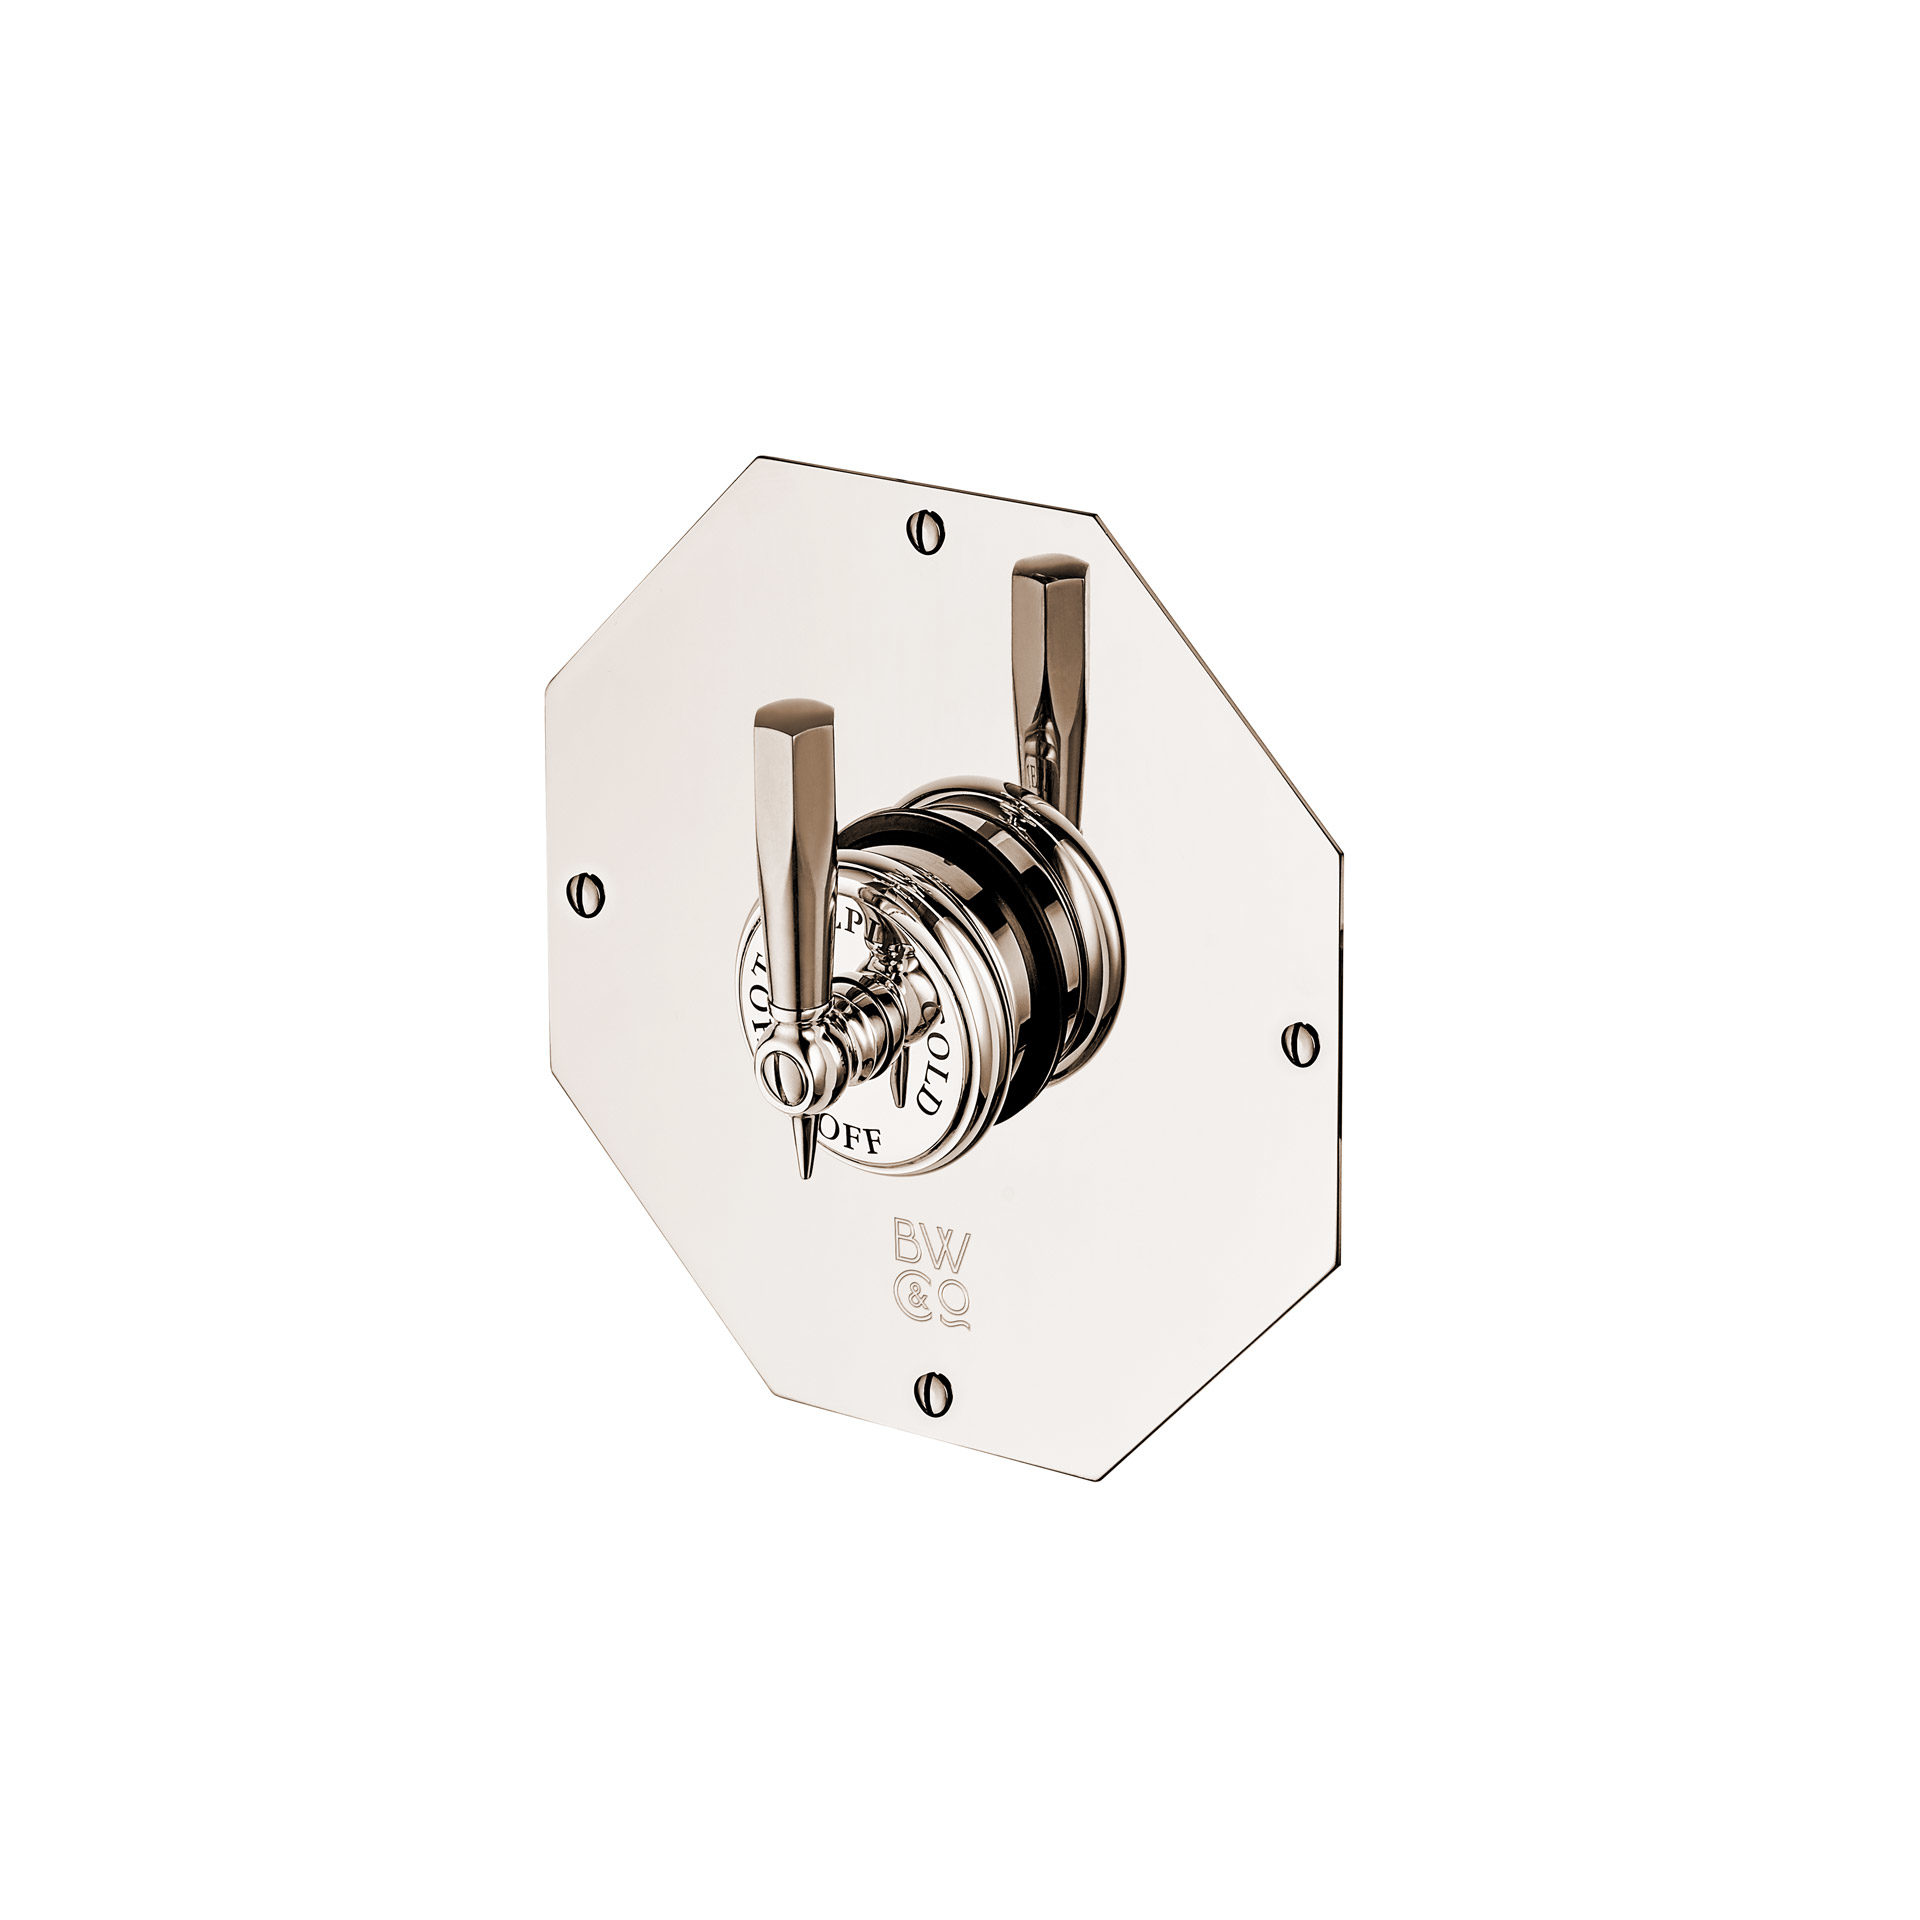 Mastercraft Concealed Thermostatic Shower Valve with Octagonal Wall Plate